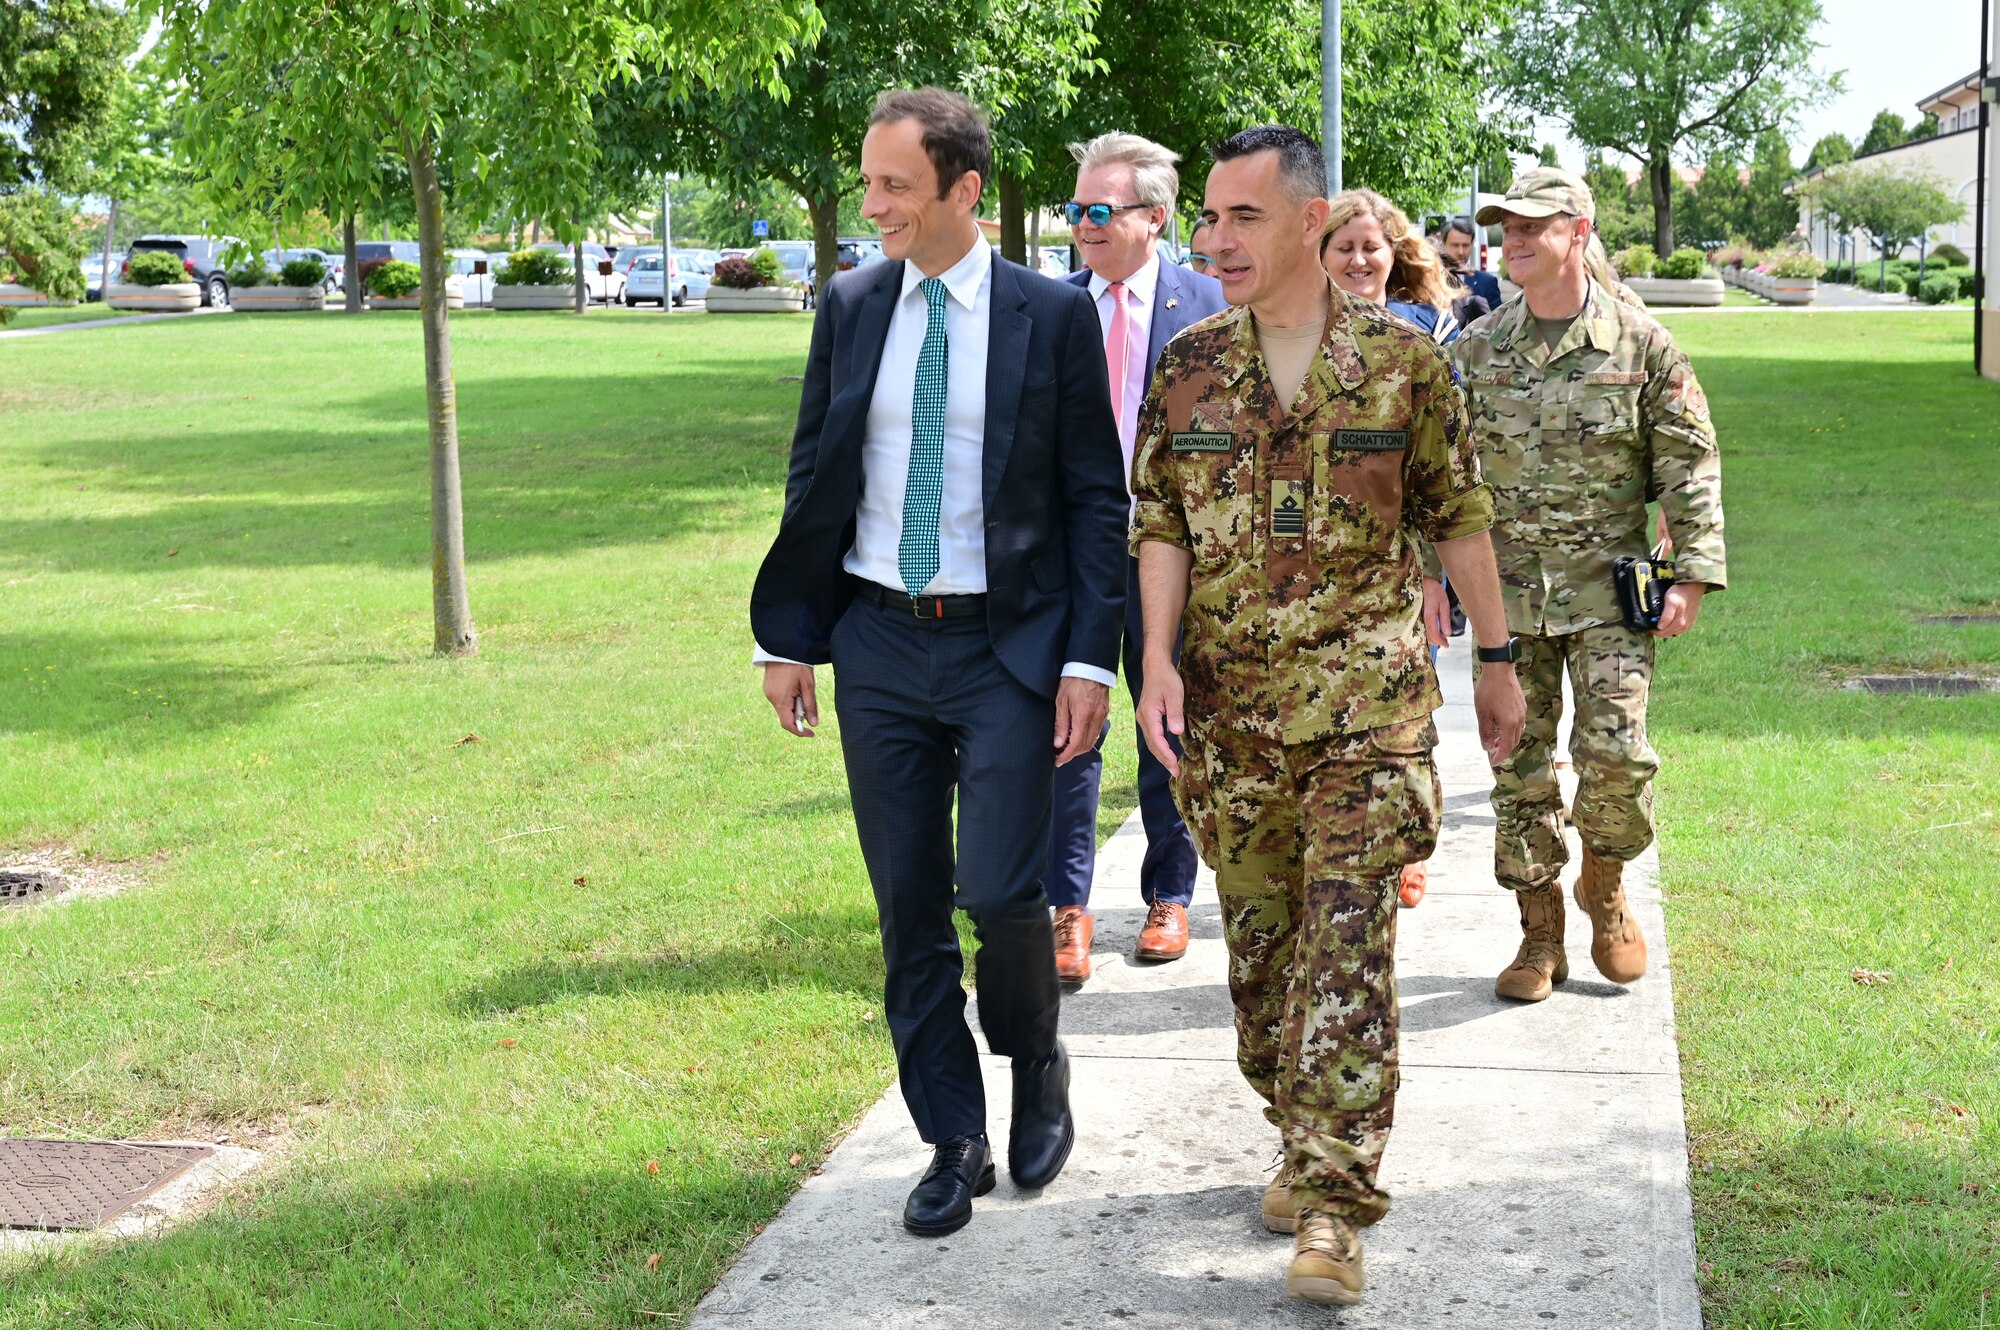 a group of people walking together during a base tour